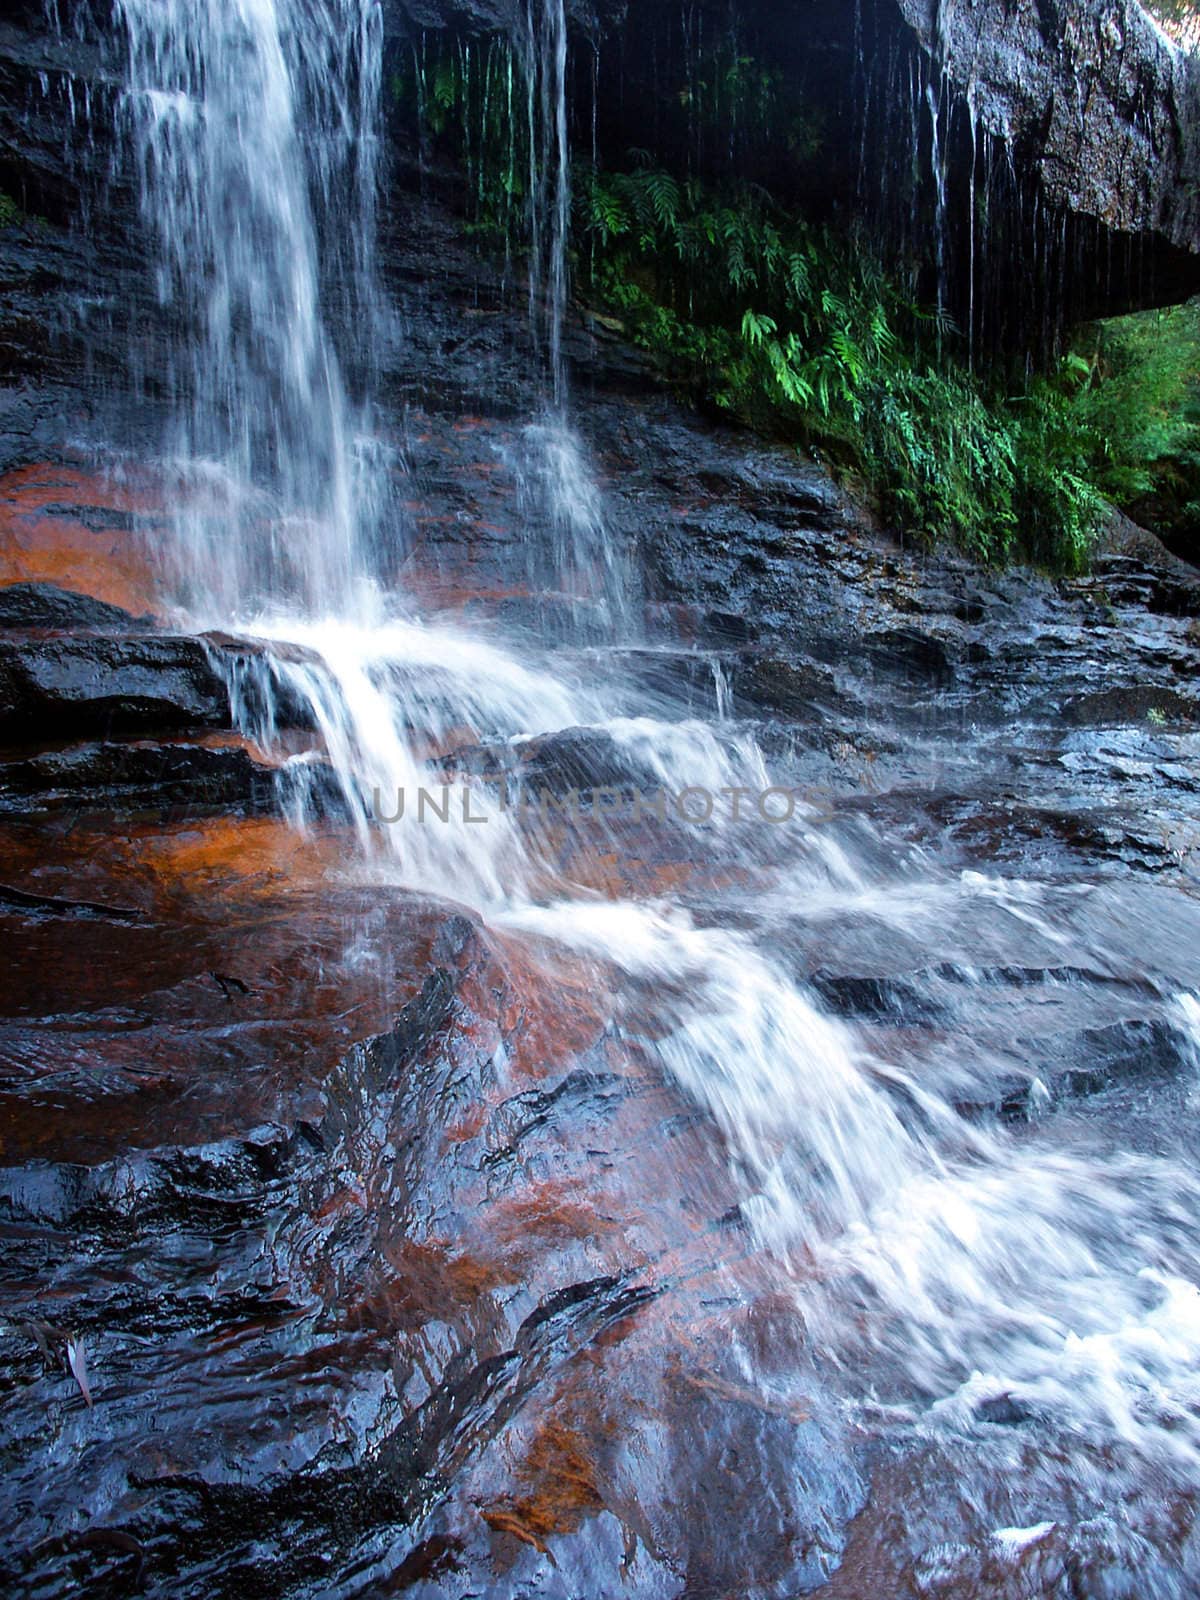 A tranquil waterfall in the Blue Mountains of New South Wales, Australia.